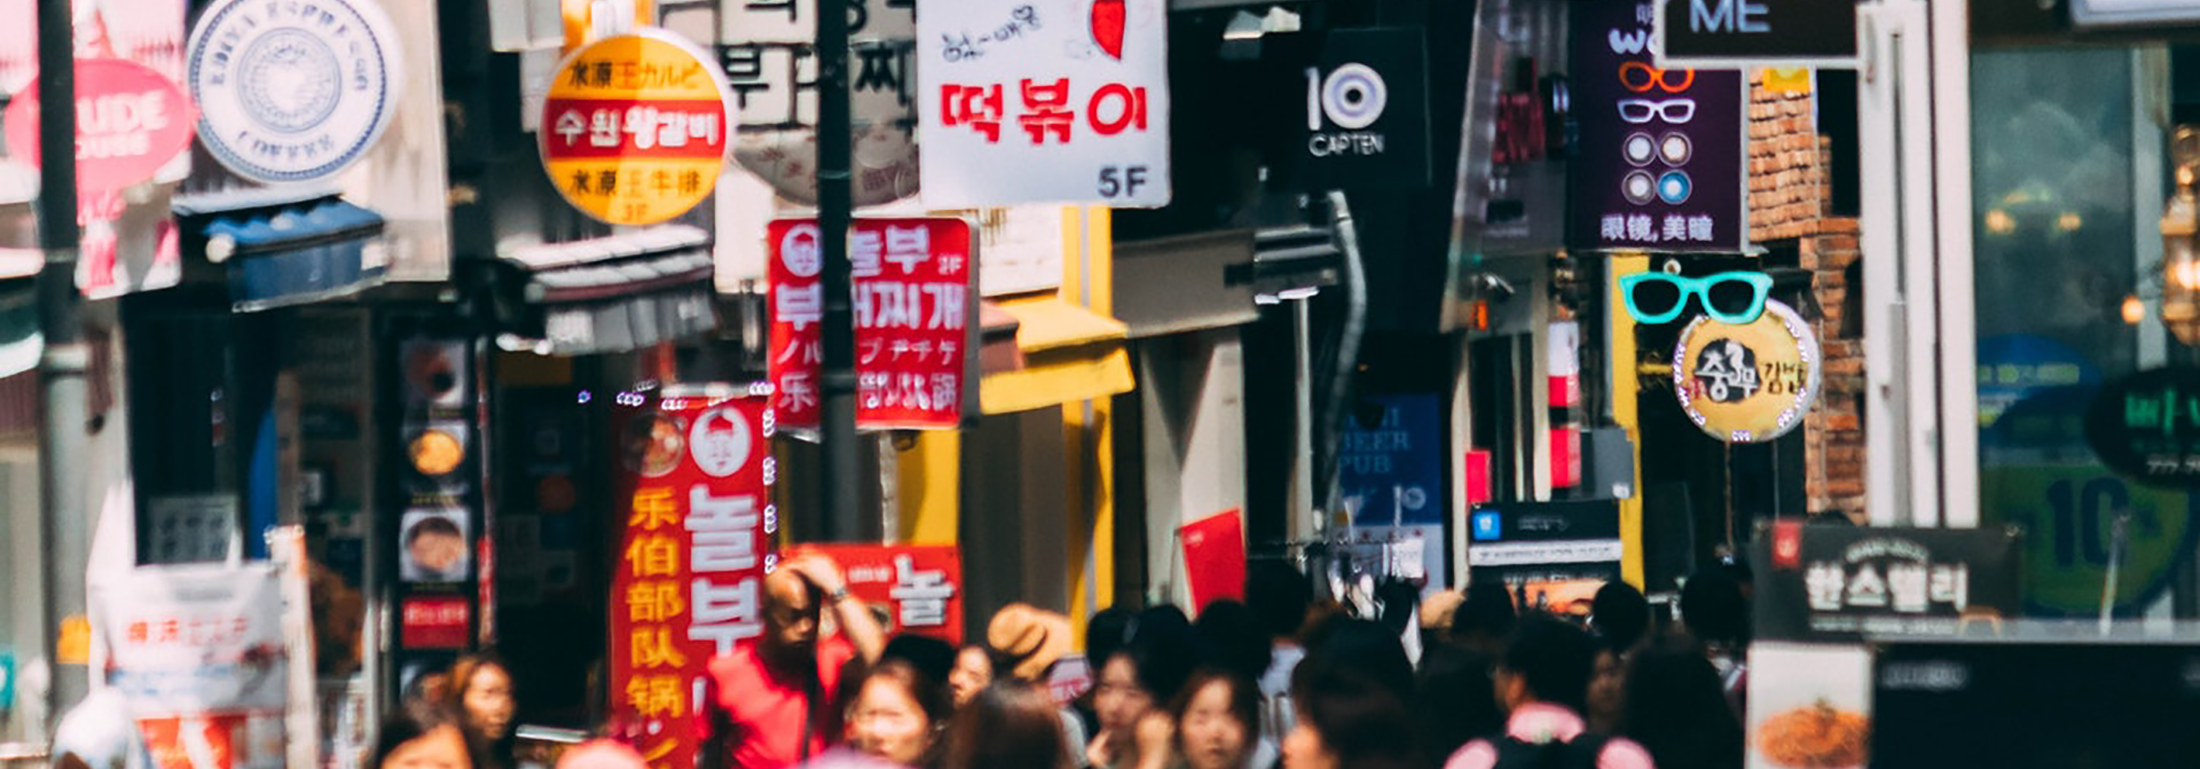 Street scene with many signs in different languages and people on the sidewalk